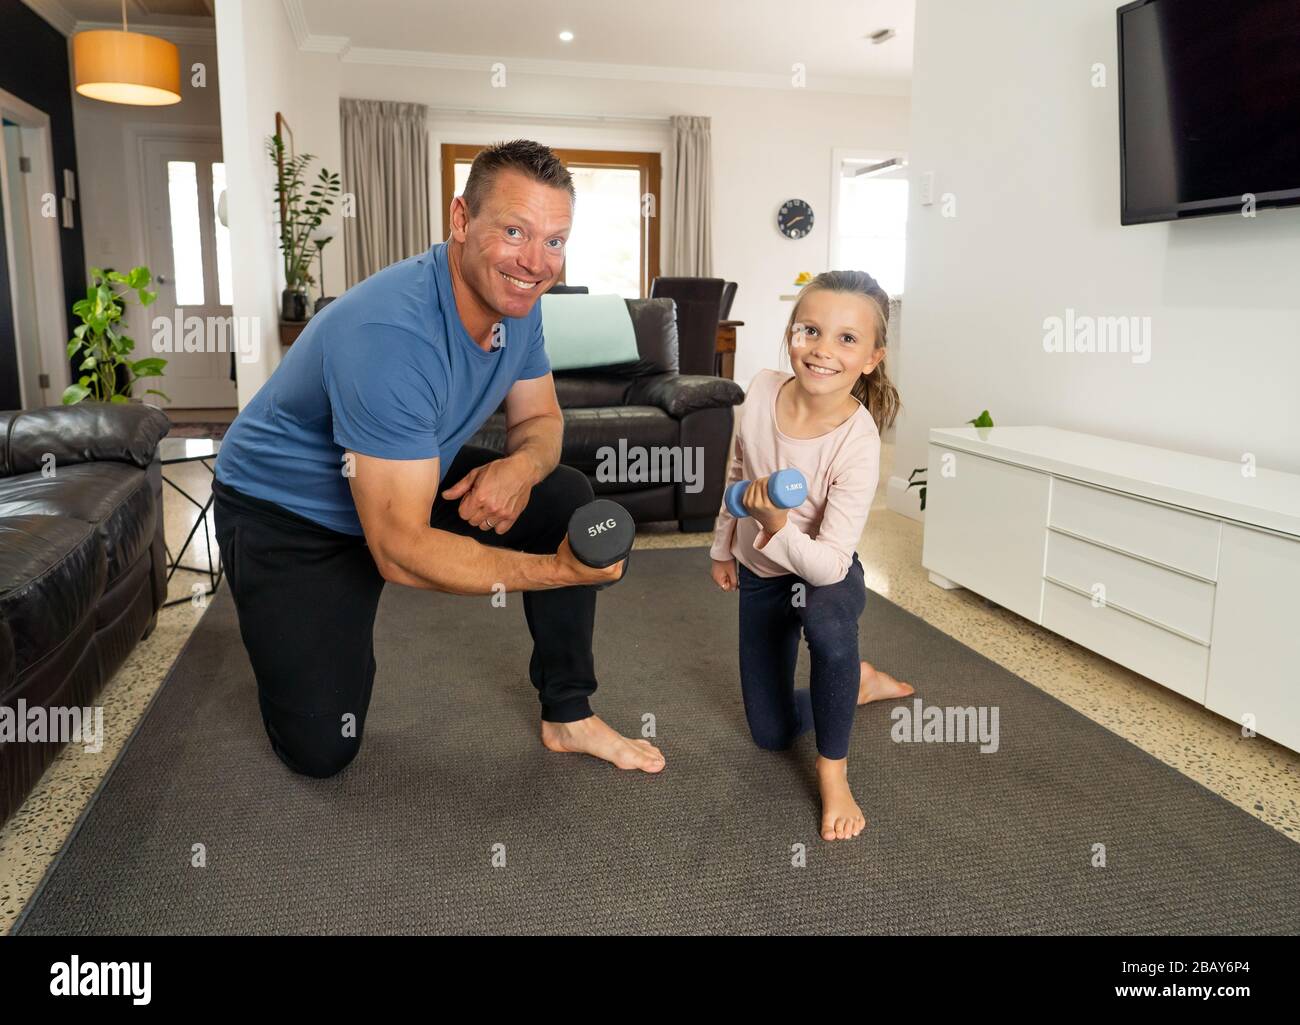 COVID-19 shutdown. Father and daughter in quarantine exercising together with dumbbells. Benefits of physical activity during lockdown. Stay at home, Stock Photo